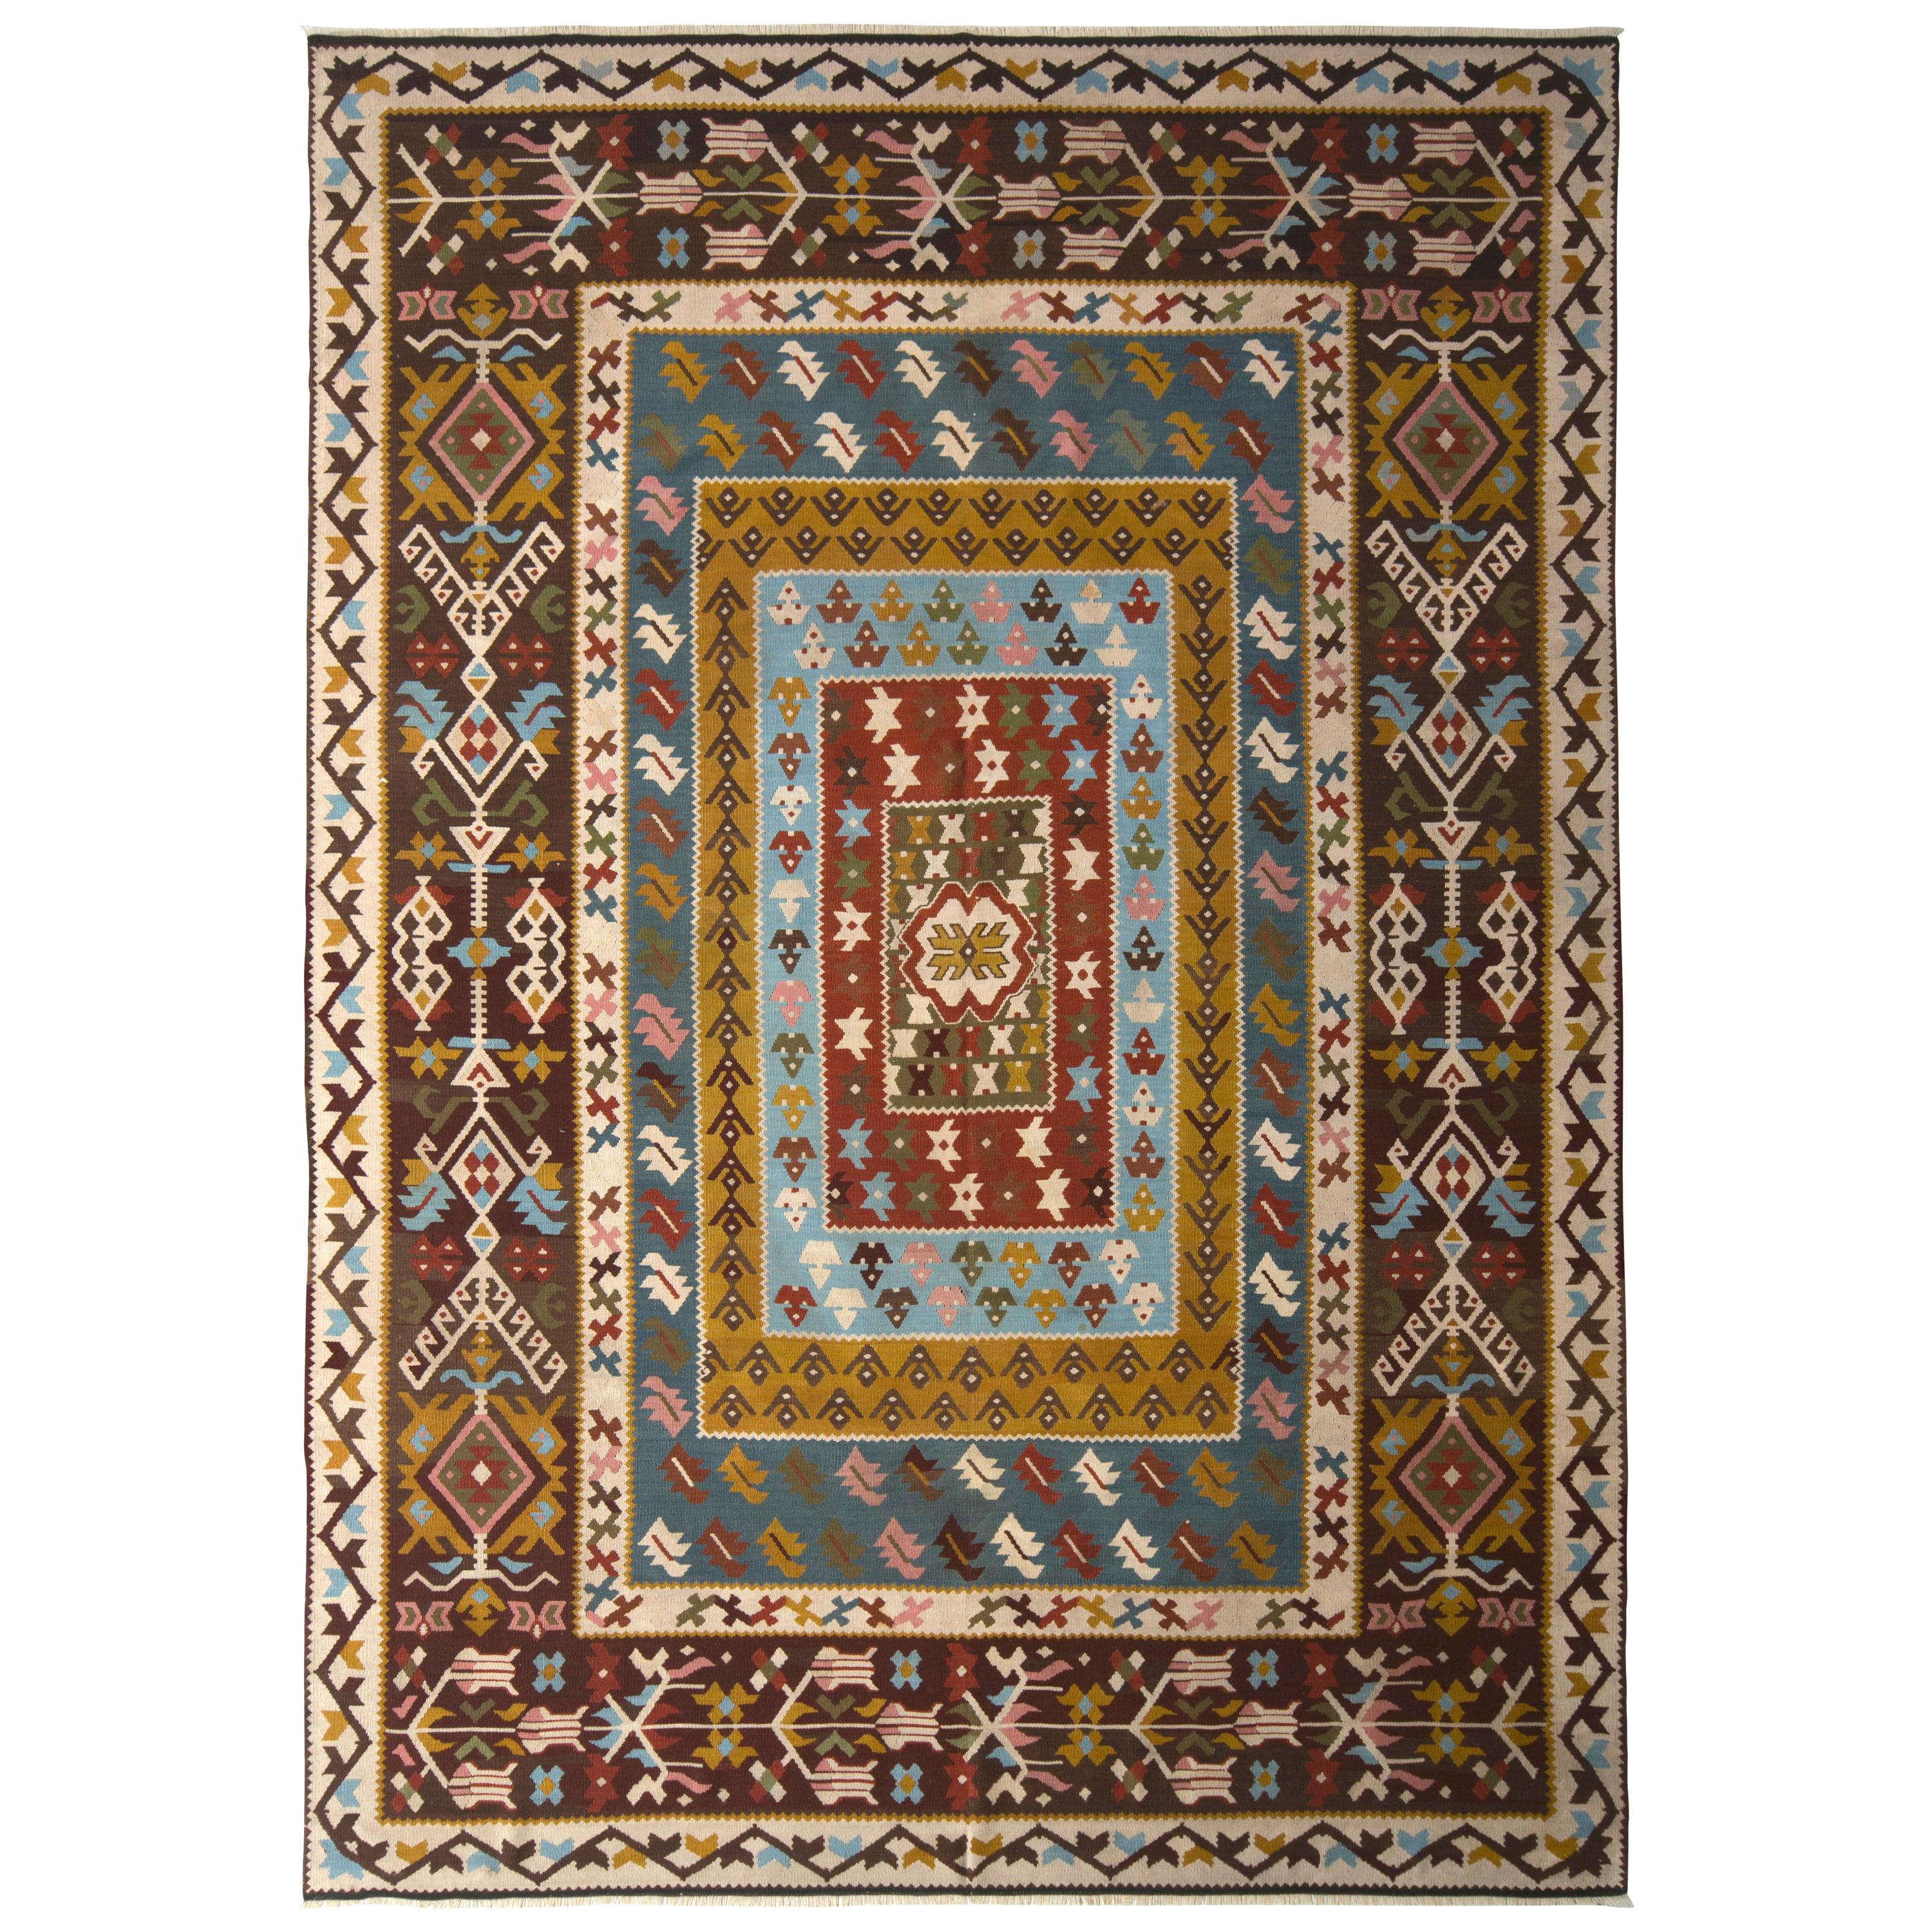 Antique Kilim Rug Blue and Beige Brown All-Over Geometric Pattern by Rug & Kilim